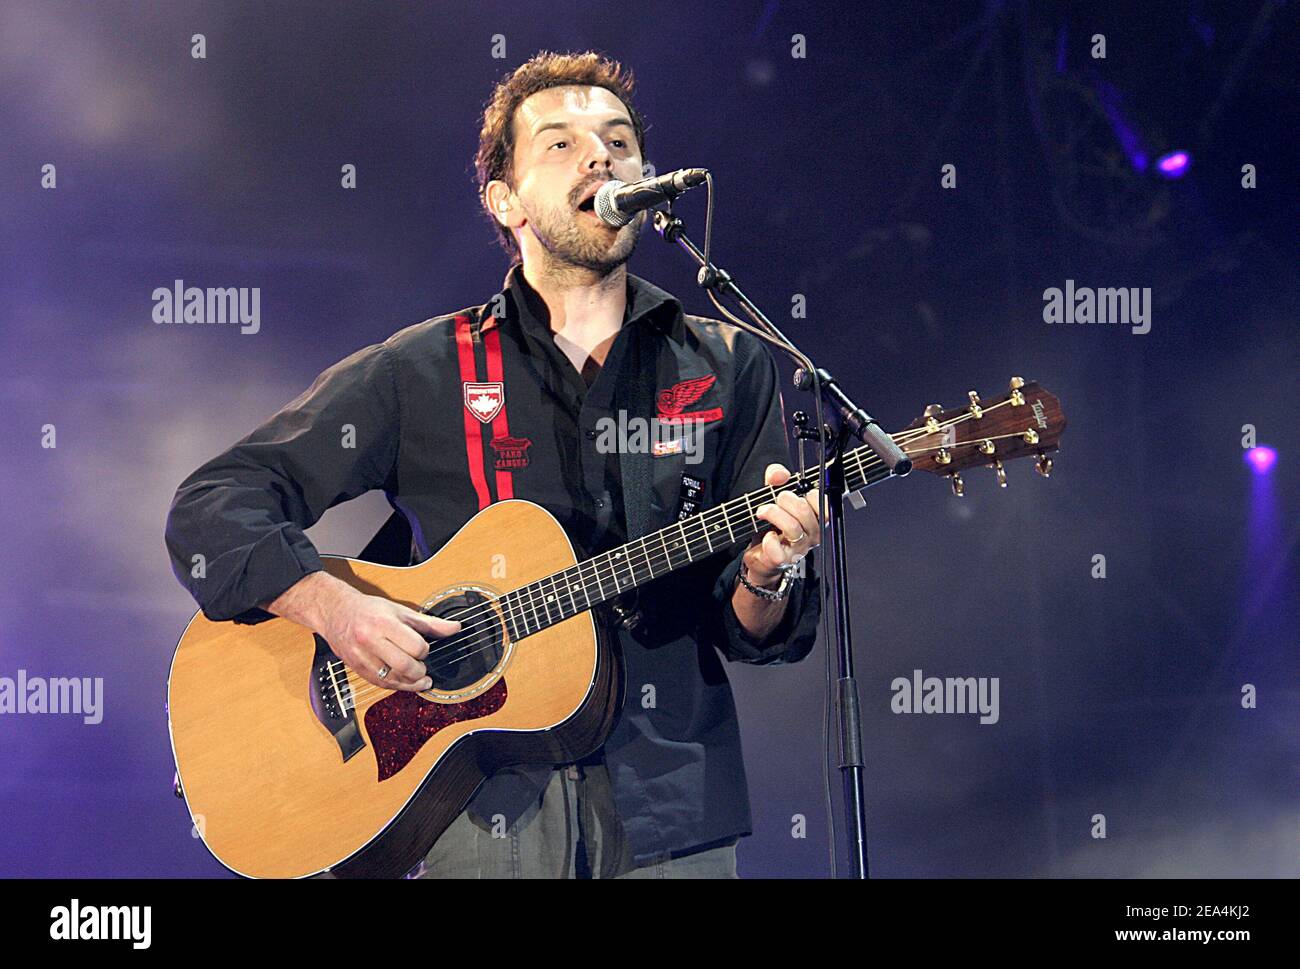 French singer Gerald de Palmas during the 2009 concert de la tolerance  organised by M6 in Agadir, Morocco on October 17, 2009. Photo by  Gouhier-Psaila/ABACAPRESS.COM Stock Photo - Alamy